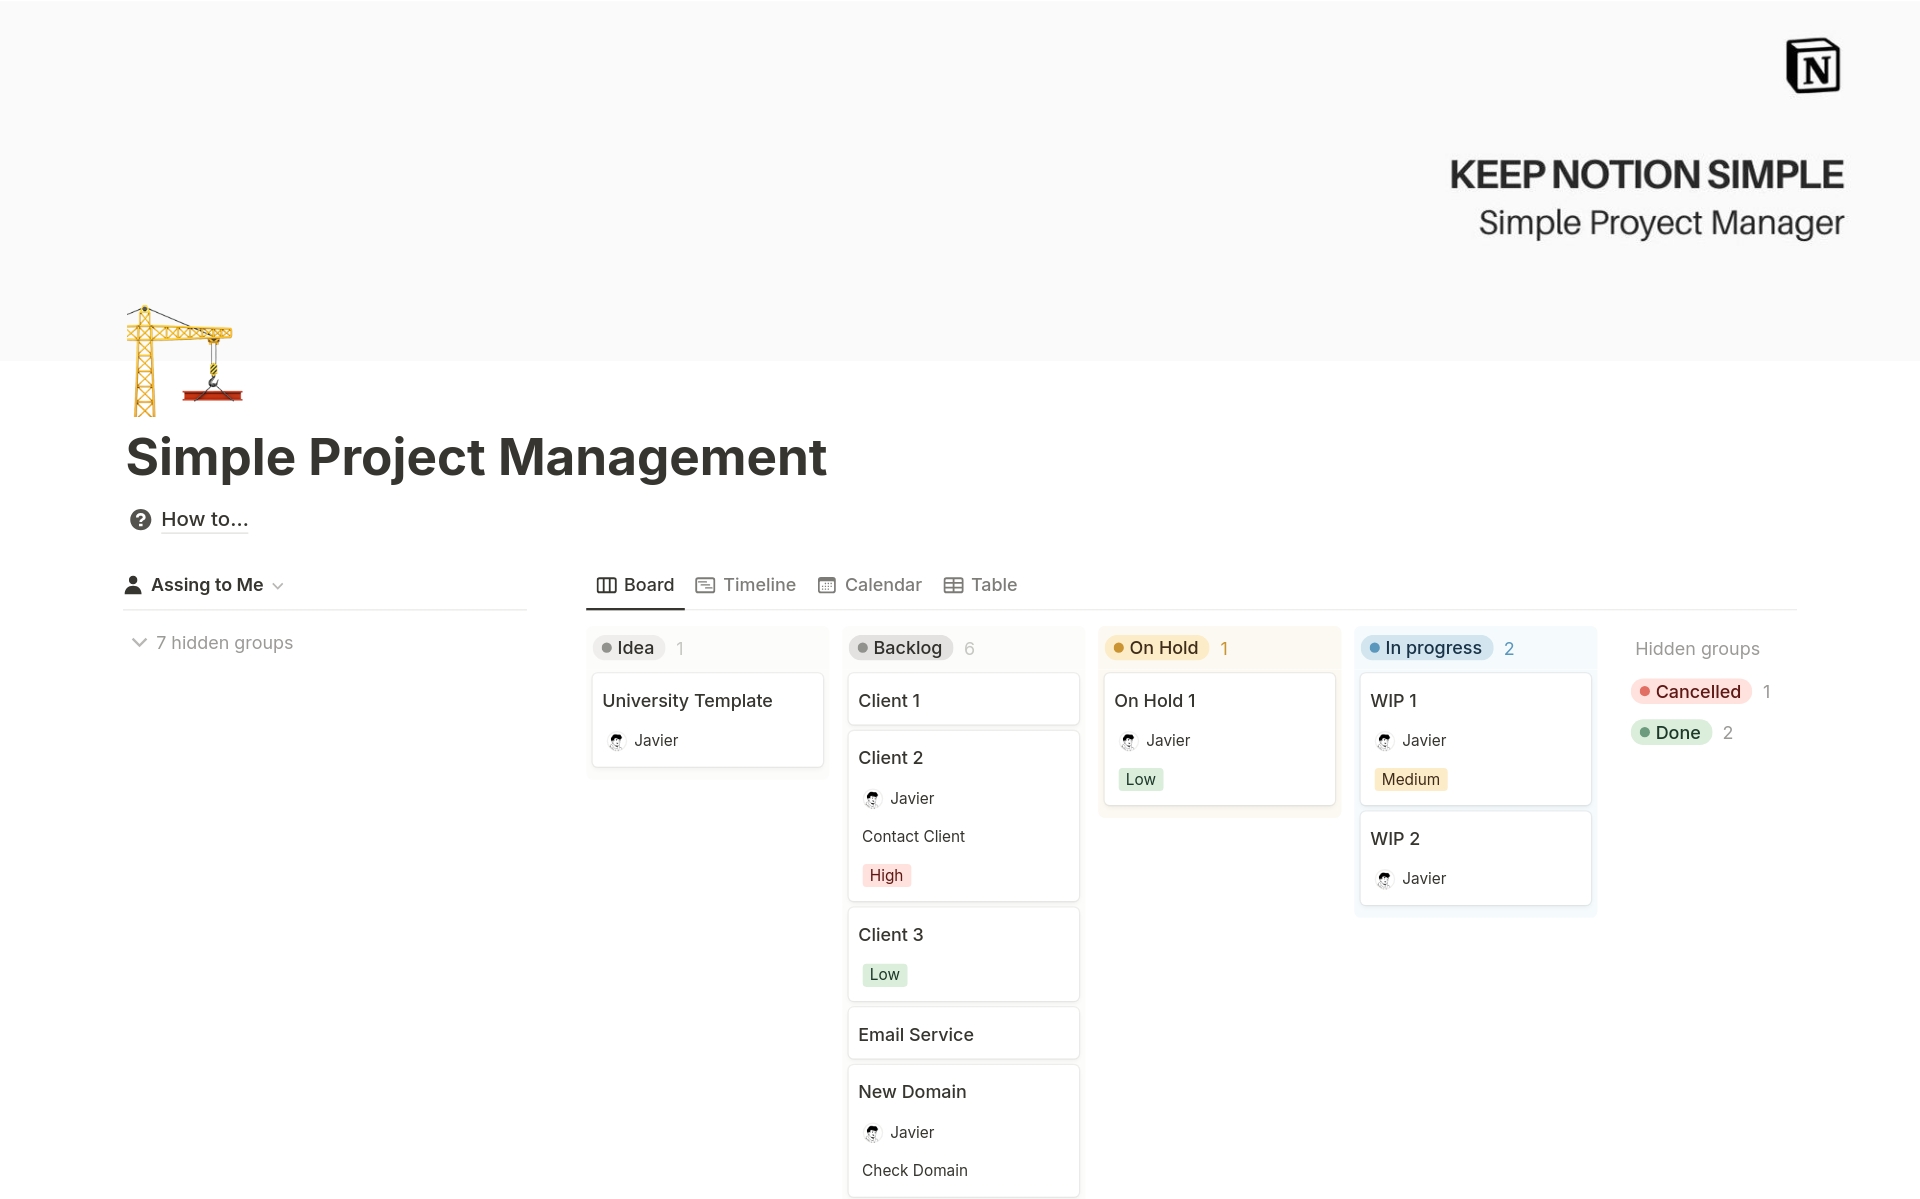 This Notion template for project management in teams offers a unique combination of visual simplicity and advanced functionality. Its biggest advantage lies in how easy it is to stay organized and on top of tasks assigned to you individually as well as to the group.